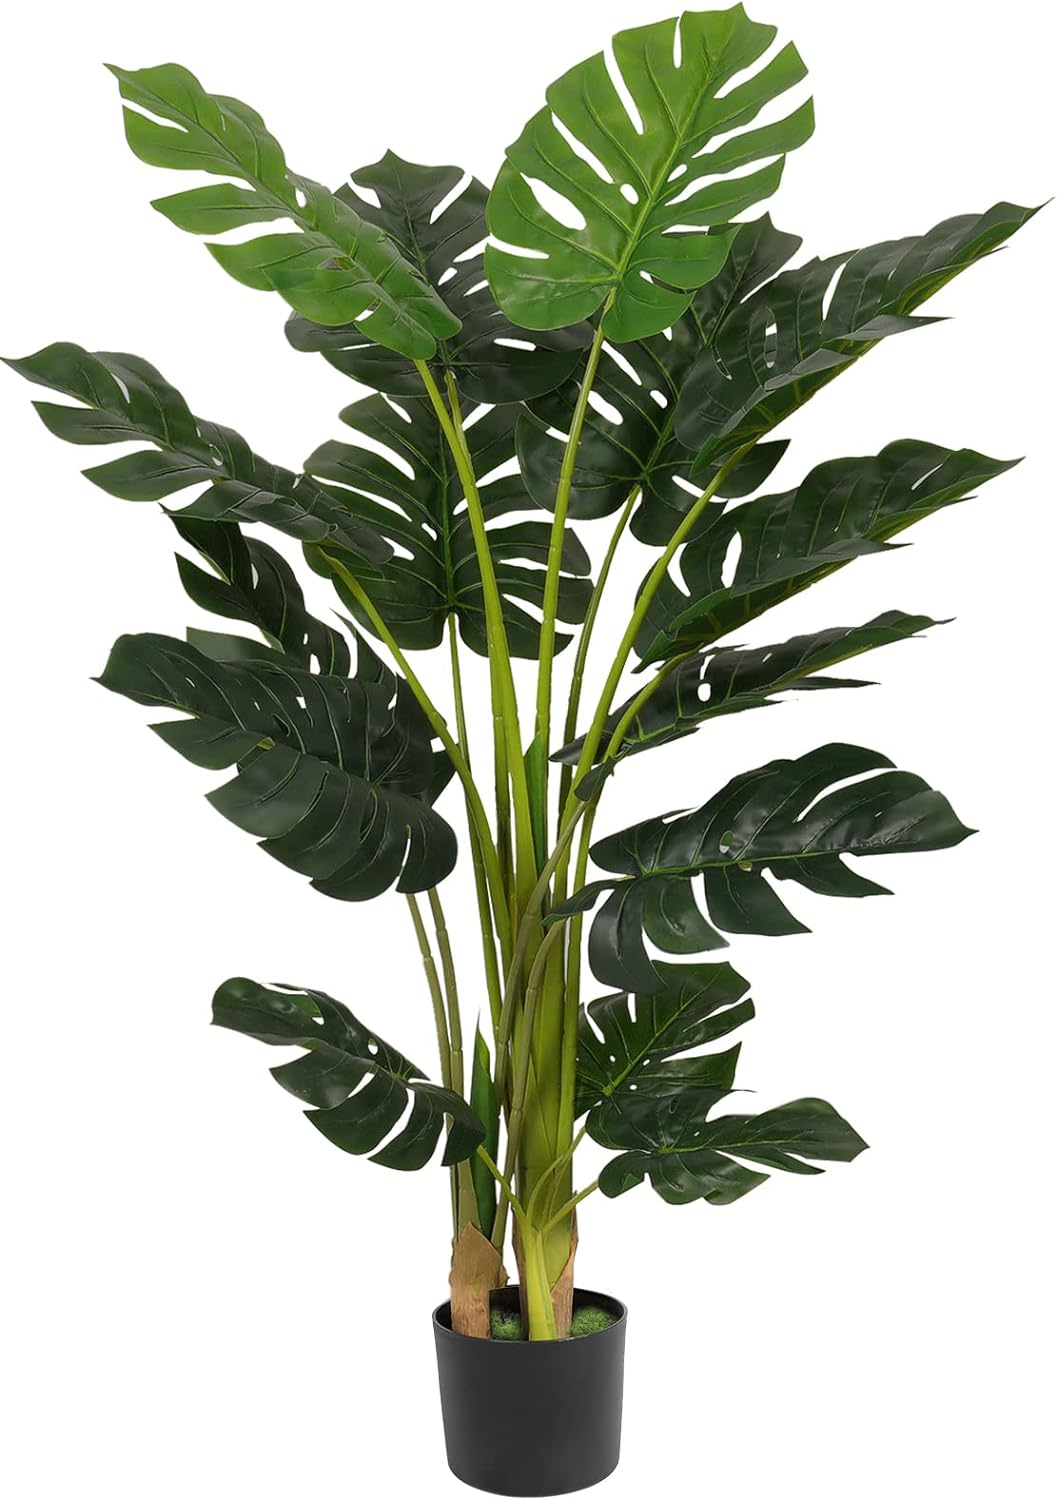 After my employees constantly killing my plants I opted for faux ones. This monstera looks great. When you bend the leaves it honestly looks real and adds such a nice aesthetic to the space.